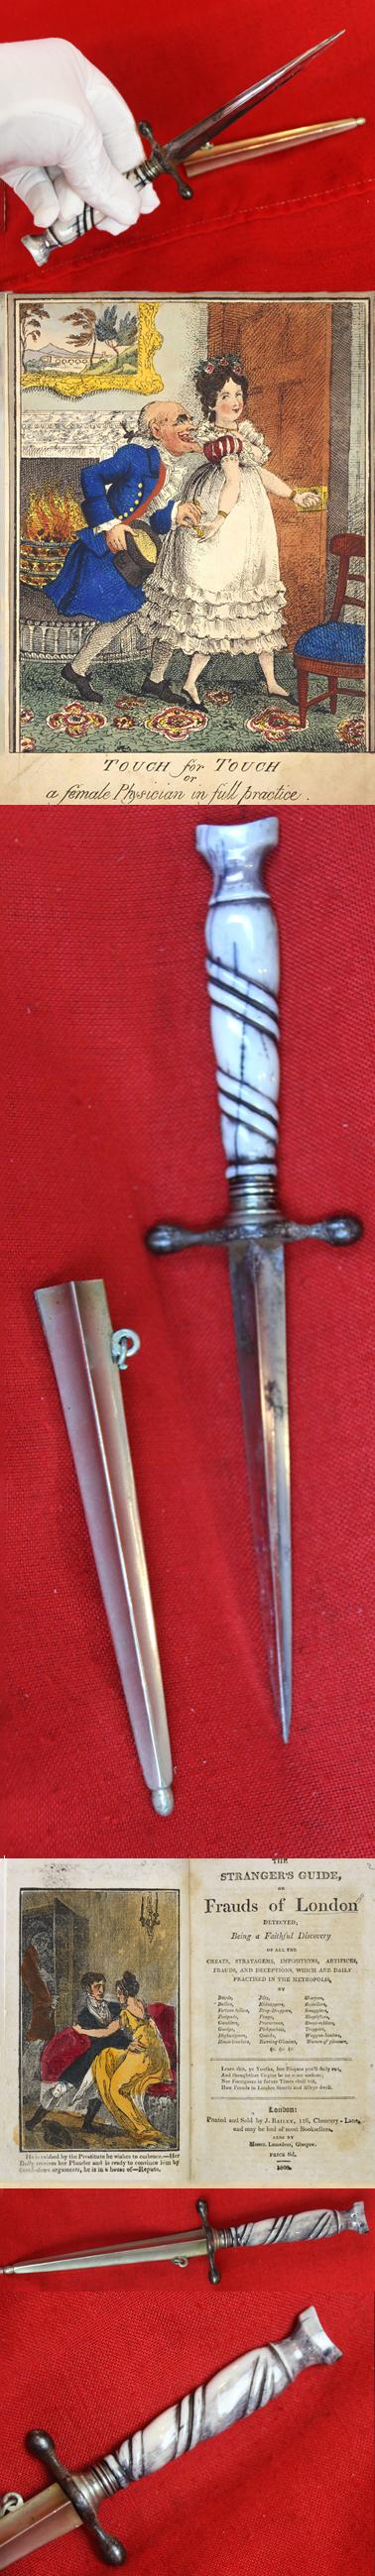 A 19th Century, Highly Attractive, Antique Stilletto Bladed So-Called Courtesan's Protective Dagger